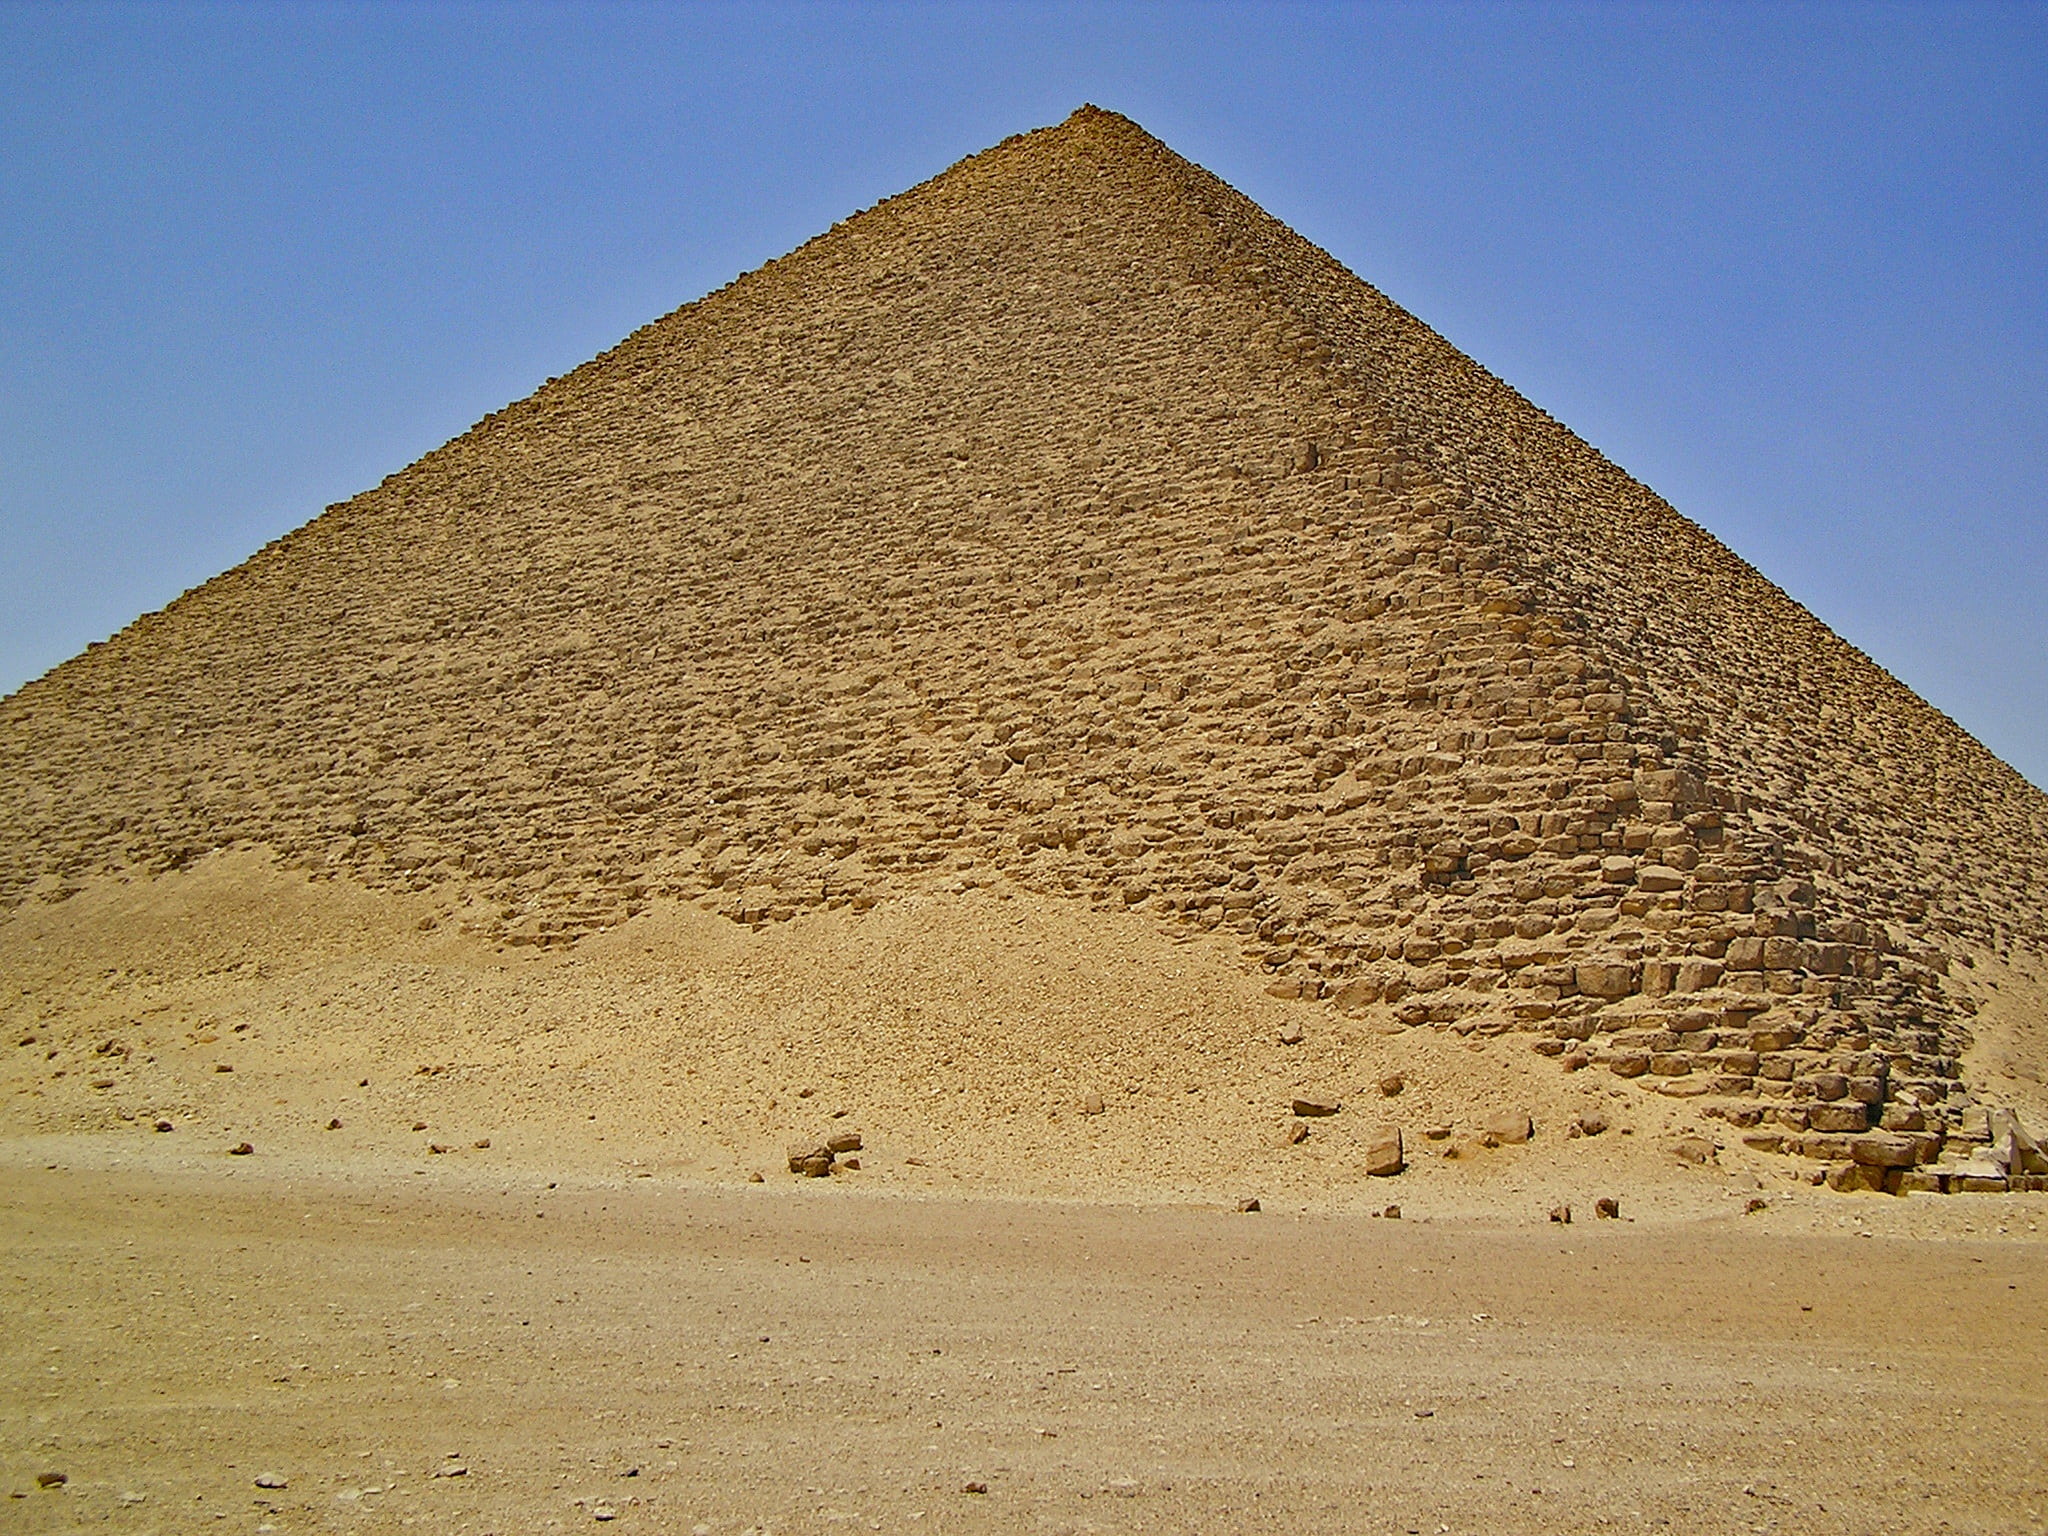 The Great Pyramid of Giza during daytime, dahshur, egypt, pyramids